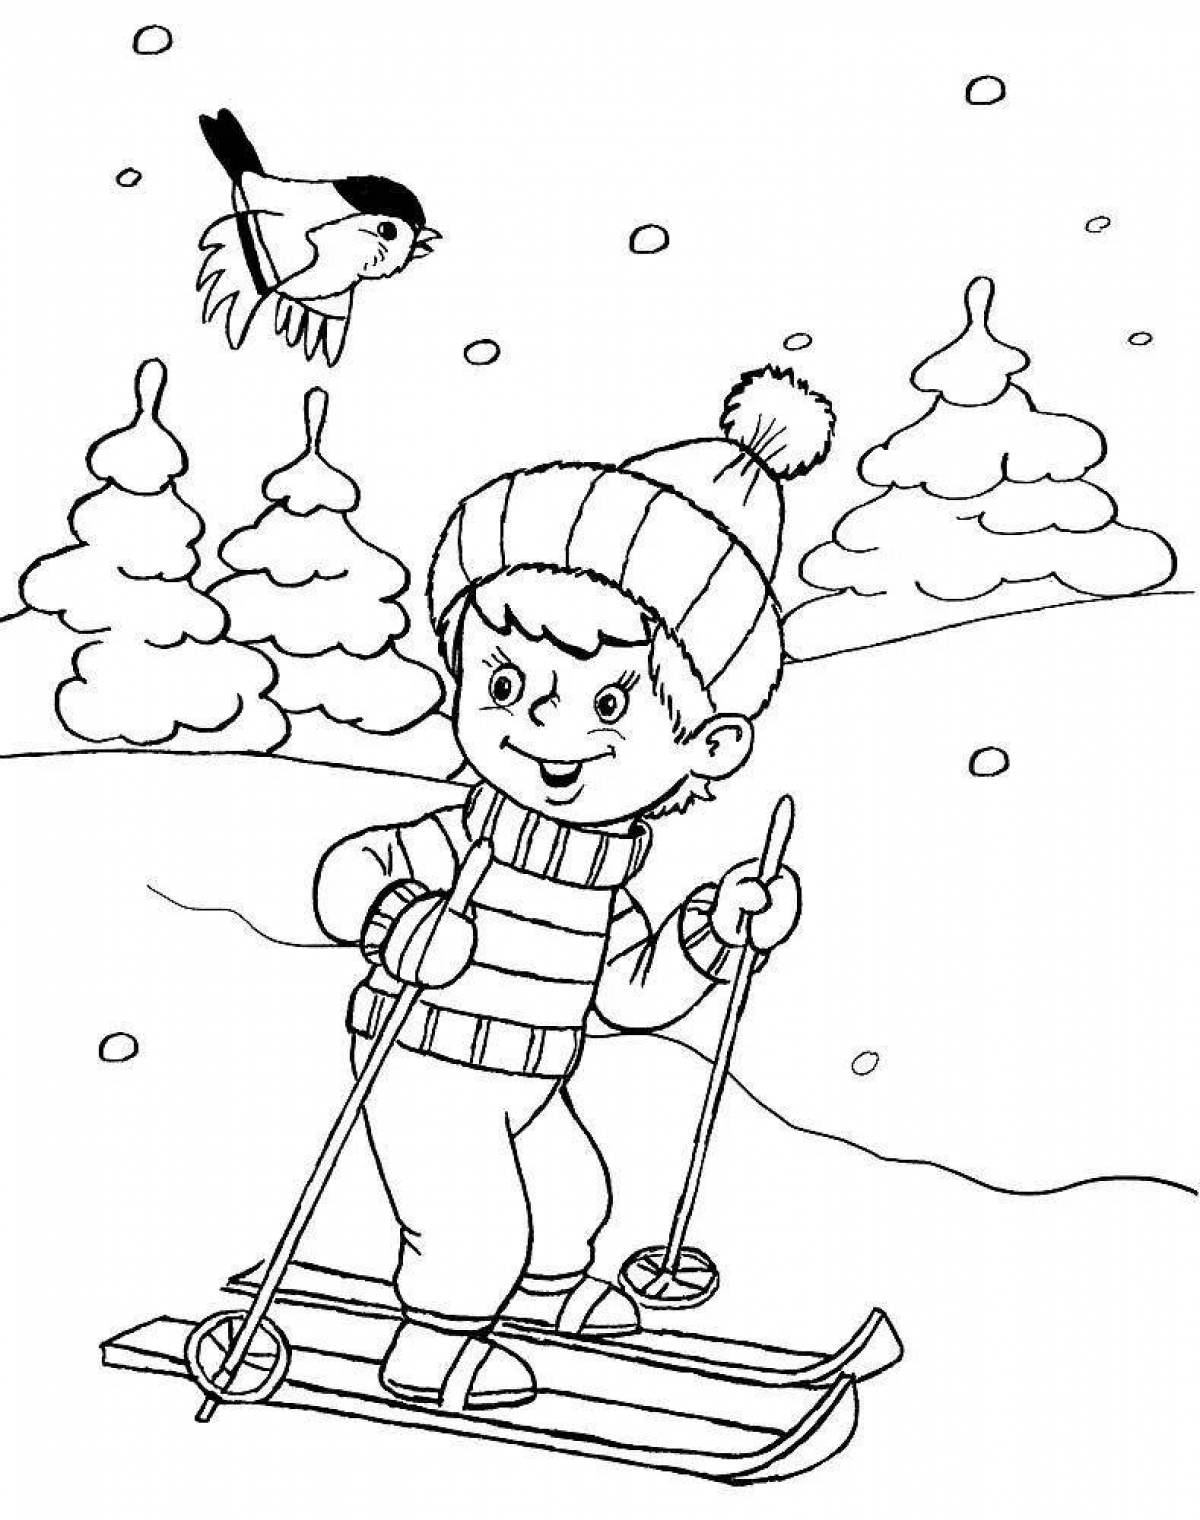 Exciting winter games coloring book